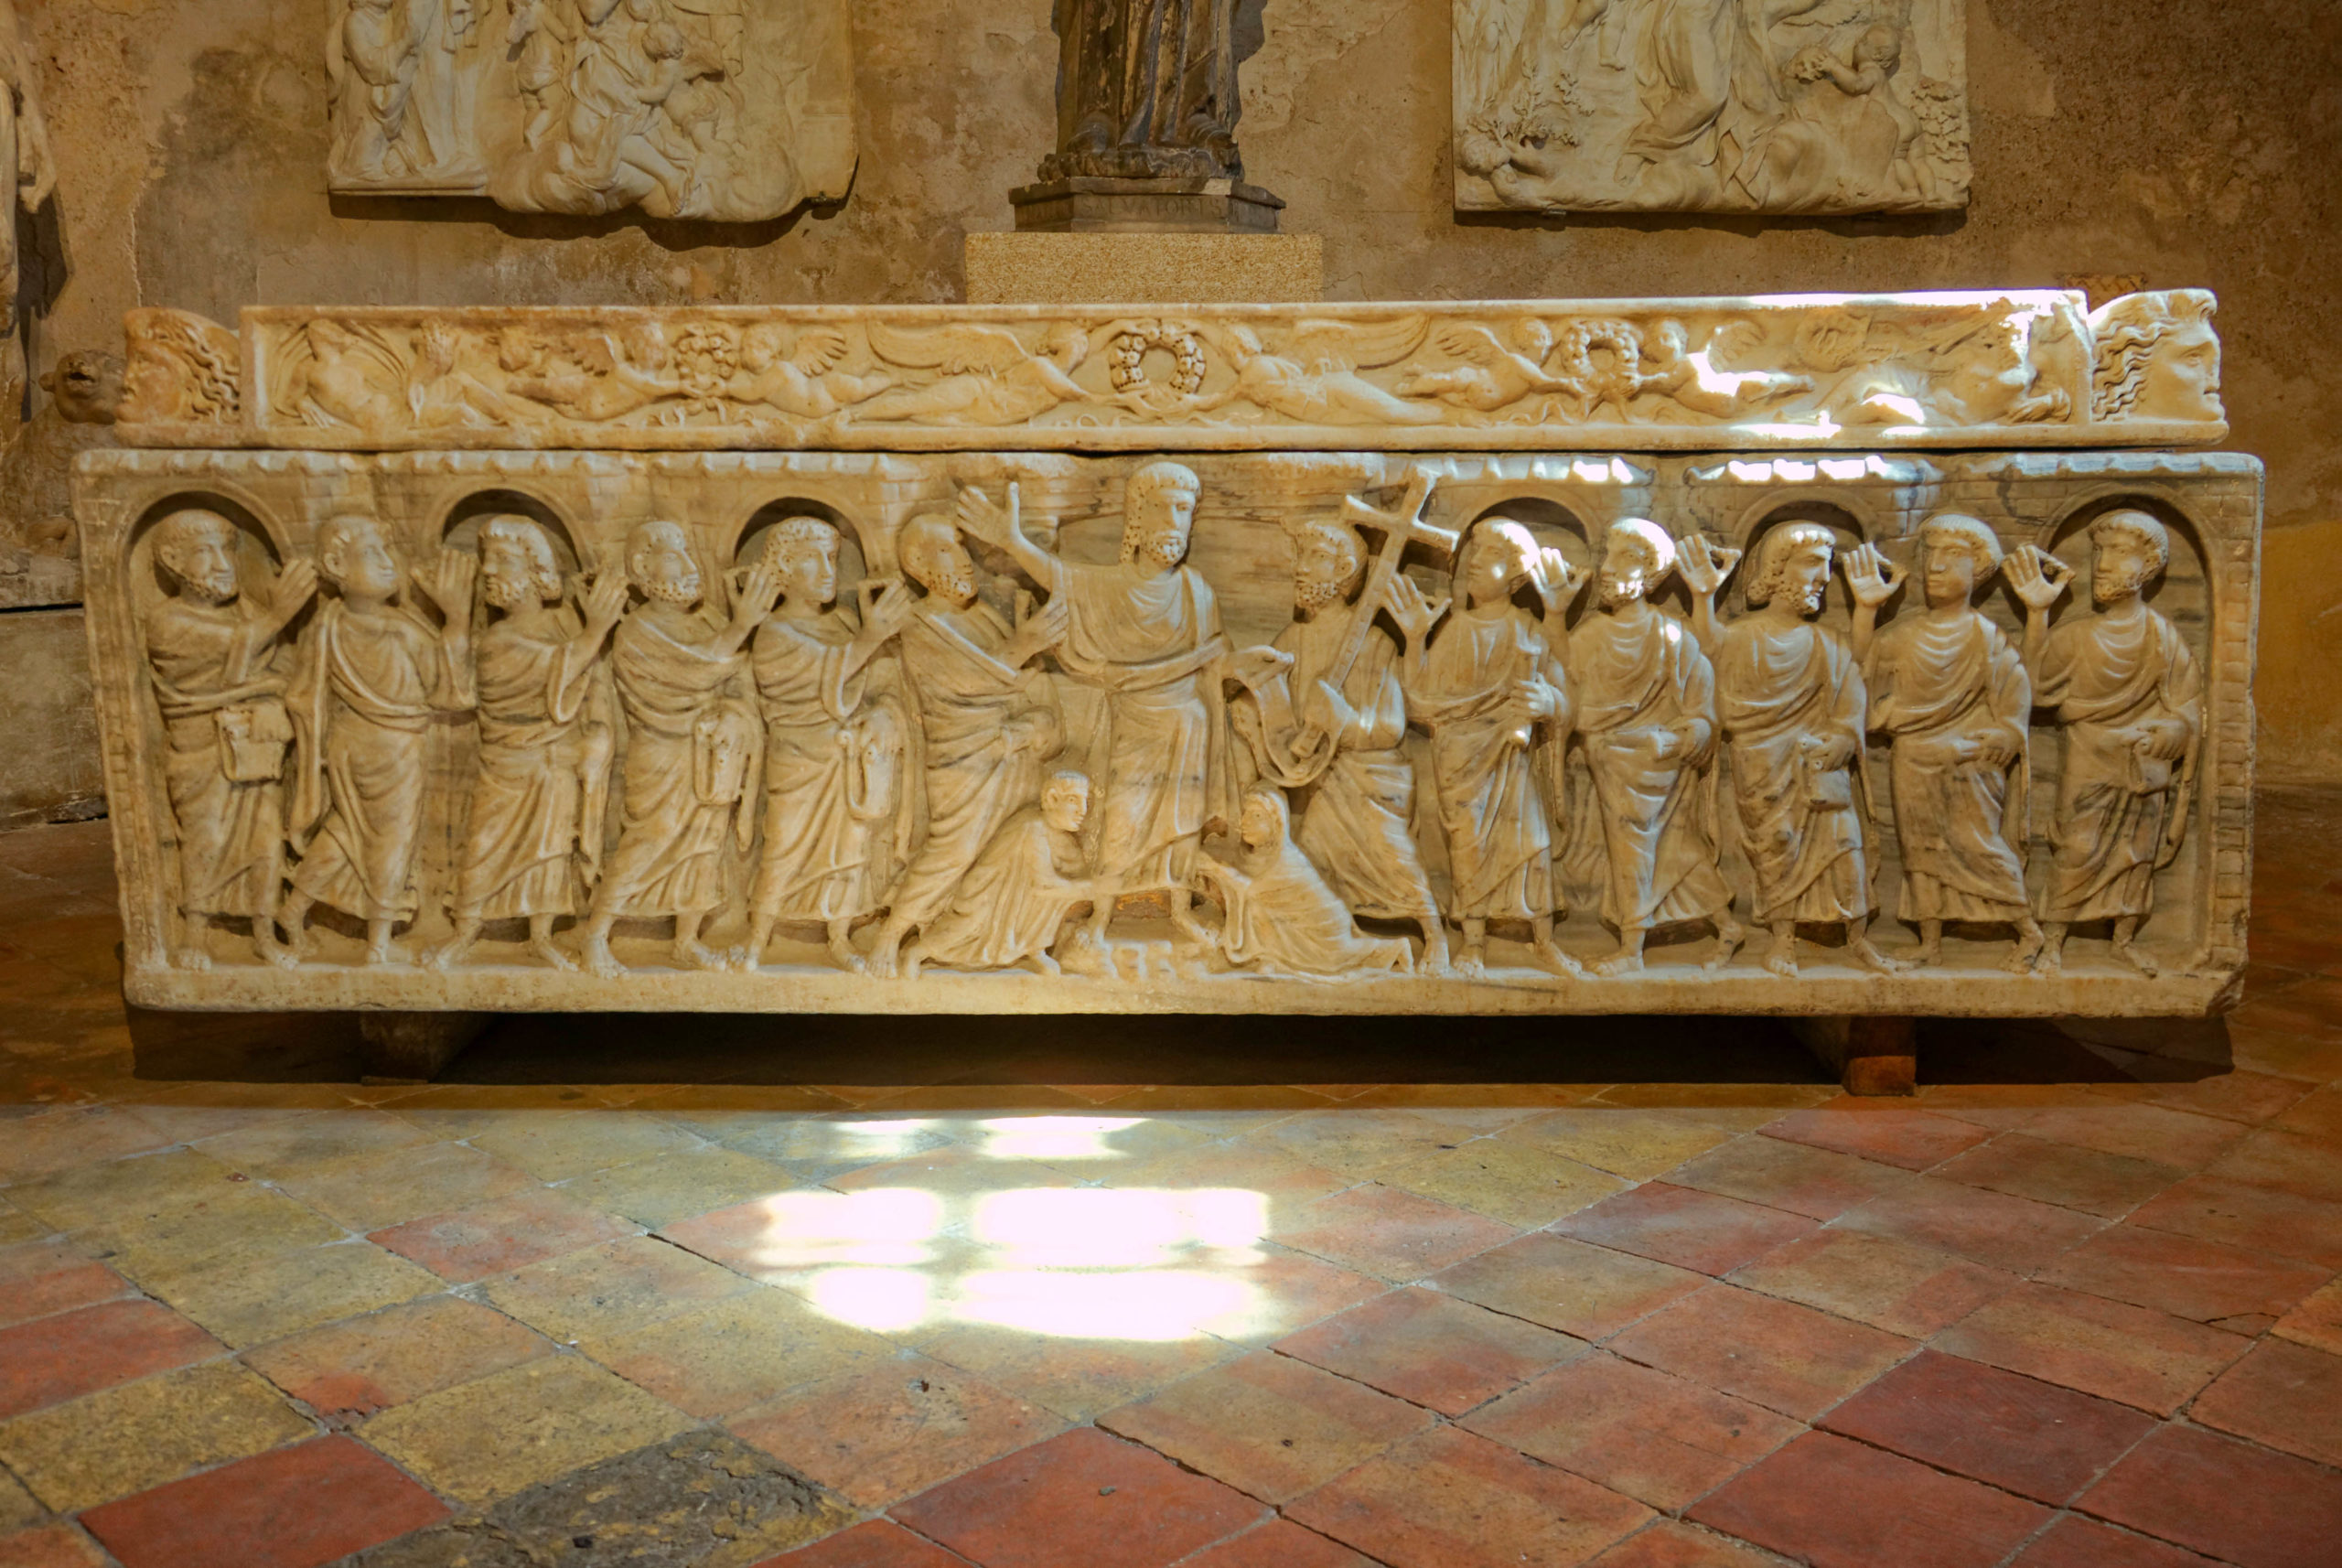 Sarcophagus of Saint-Mitre © Bjs - licence [CC BY-SA 4.0] from Wikimedia Commons